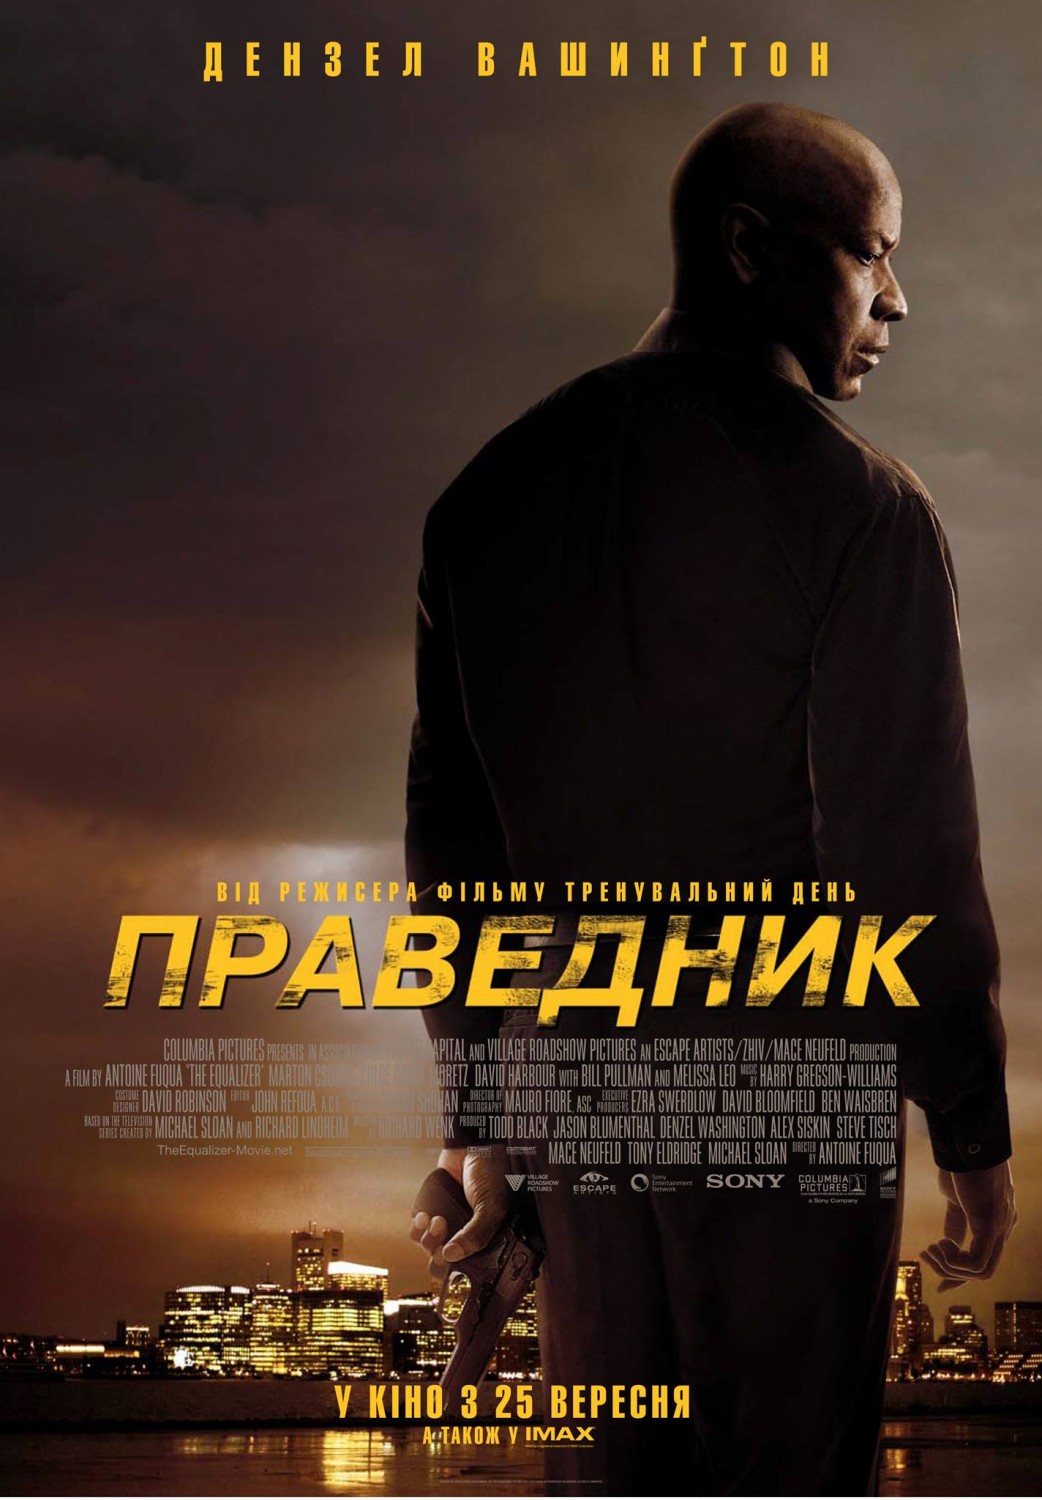 Extra Large Movie Poster Image for The Equalizer (#7 of 9)